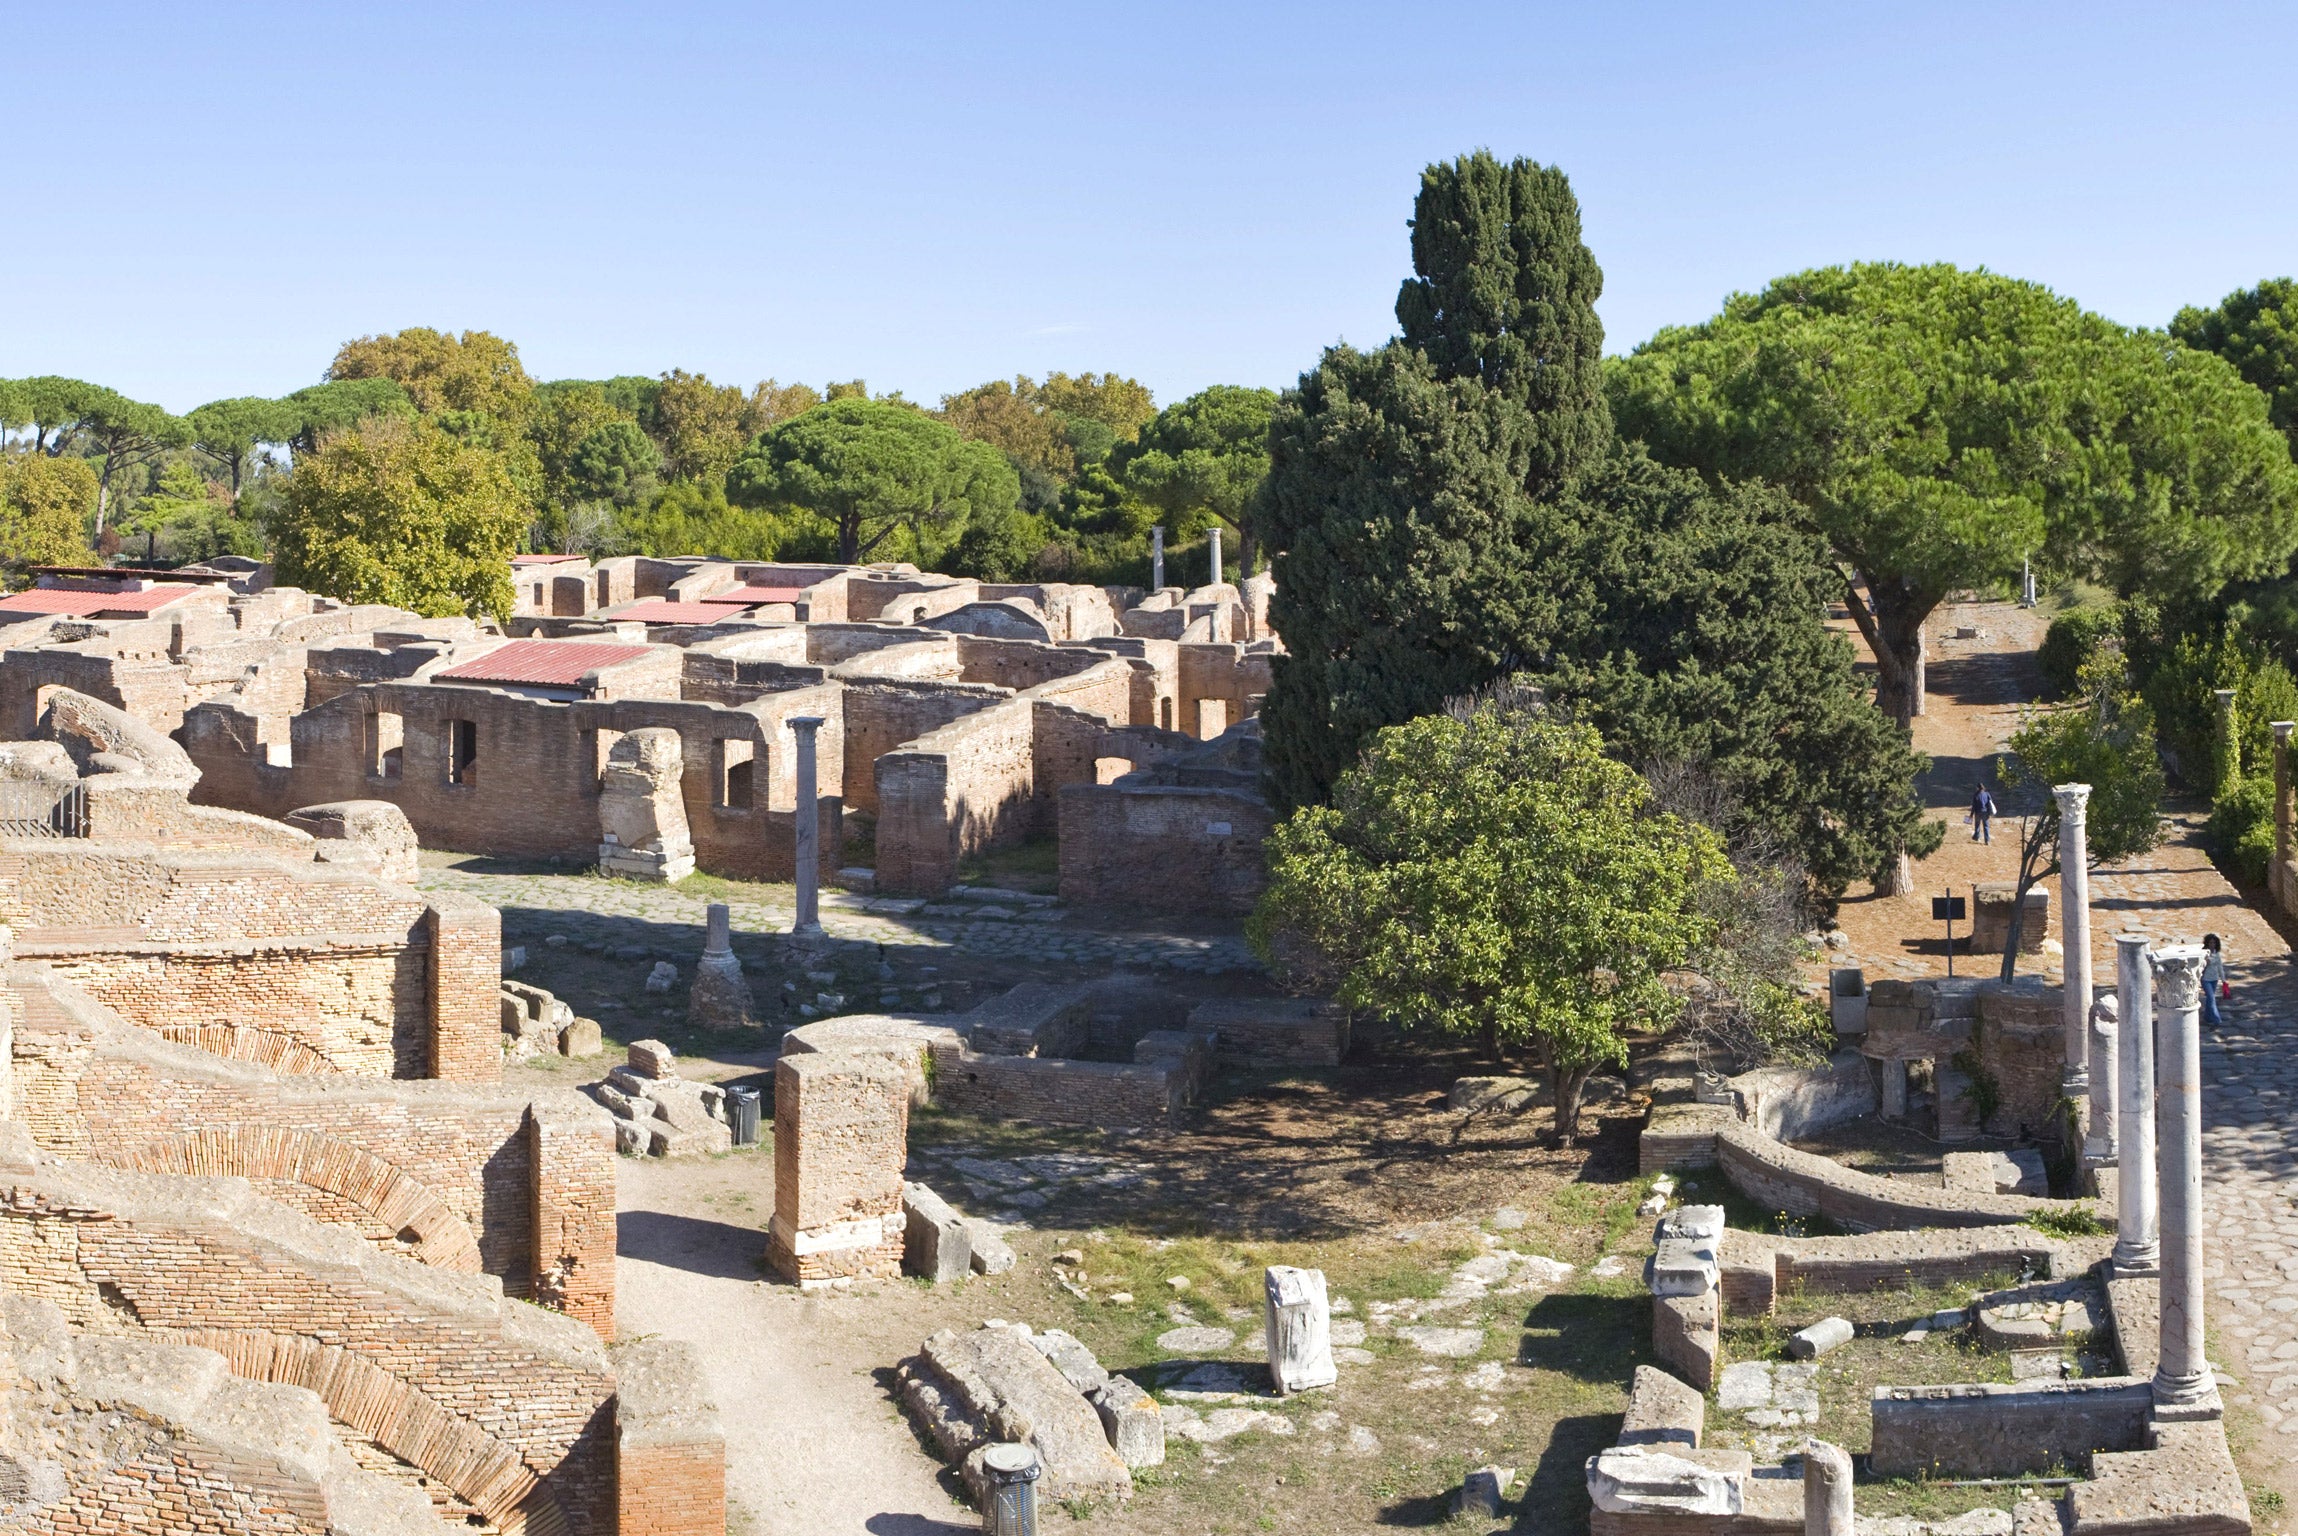 The ancient city of Ostia is of much interest to researchers (Rex)